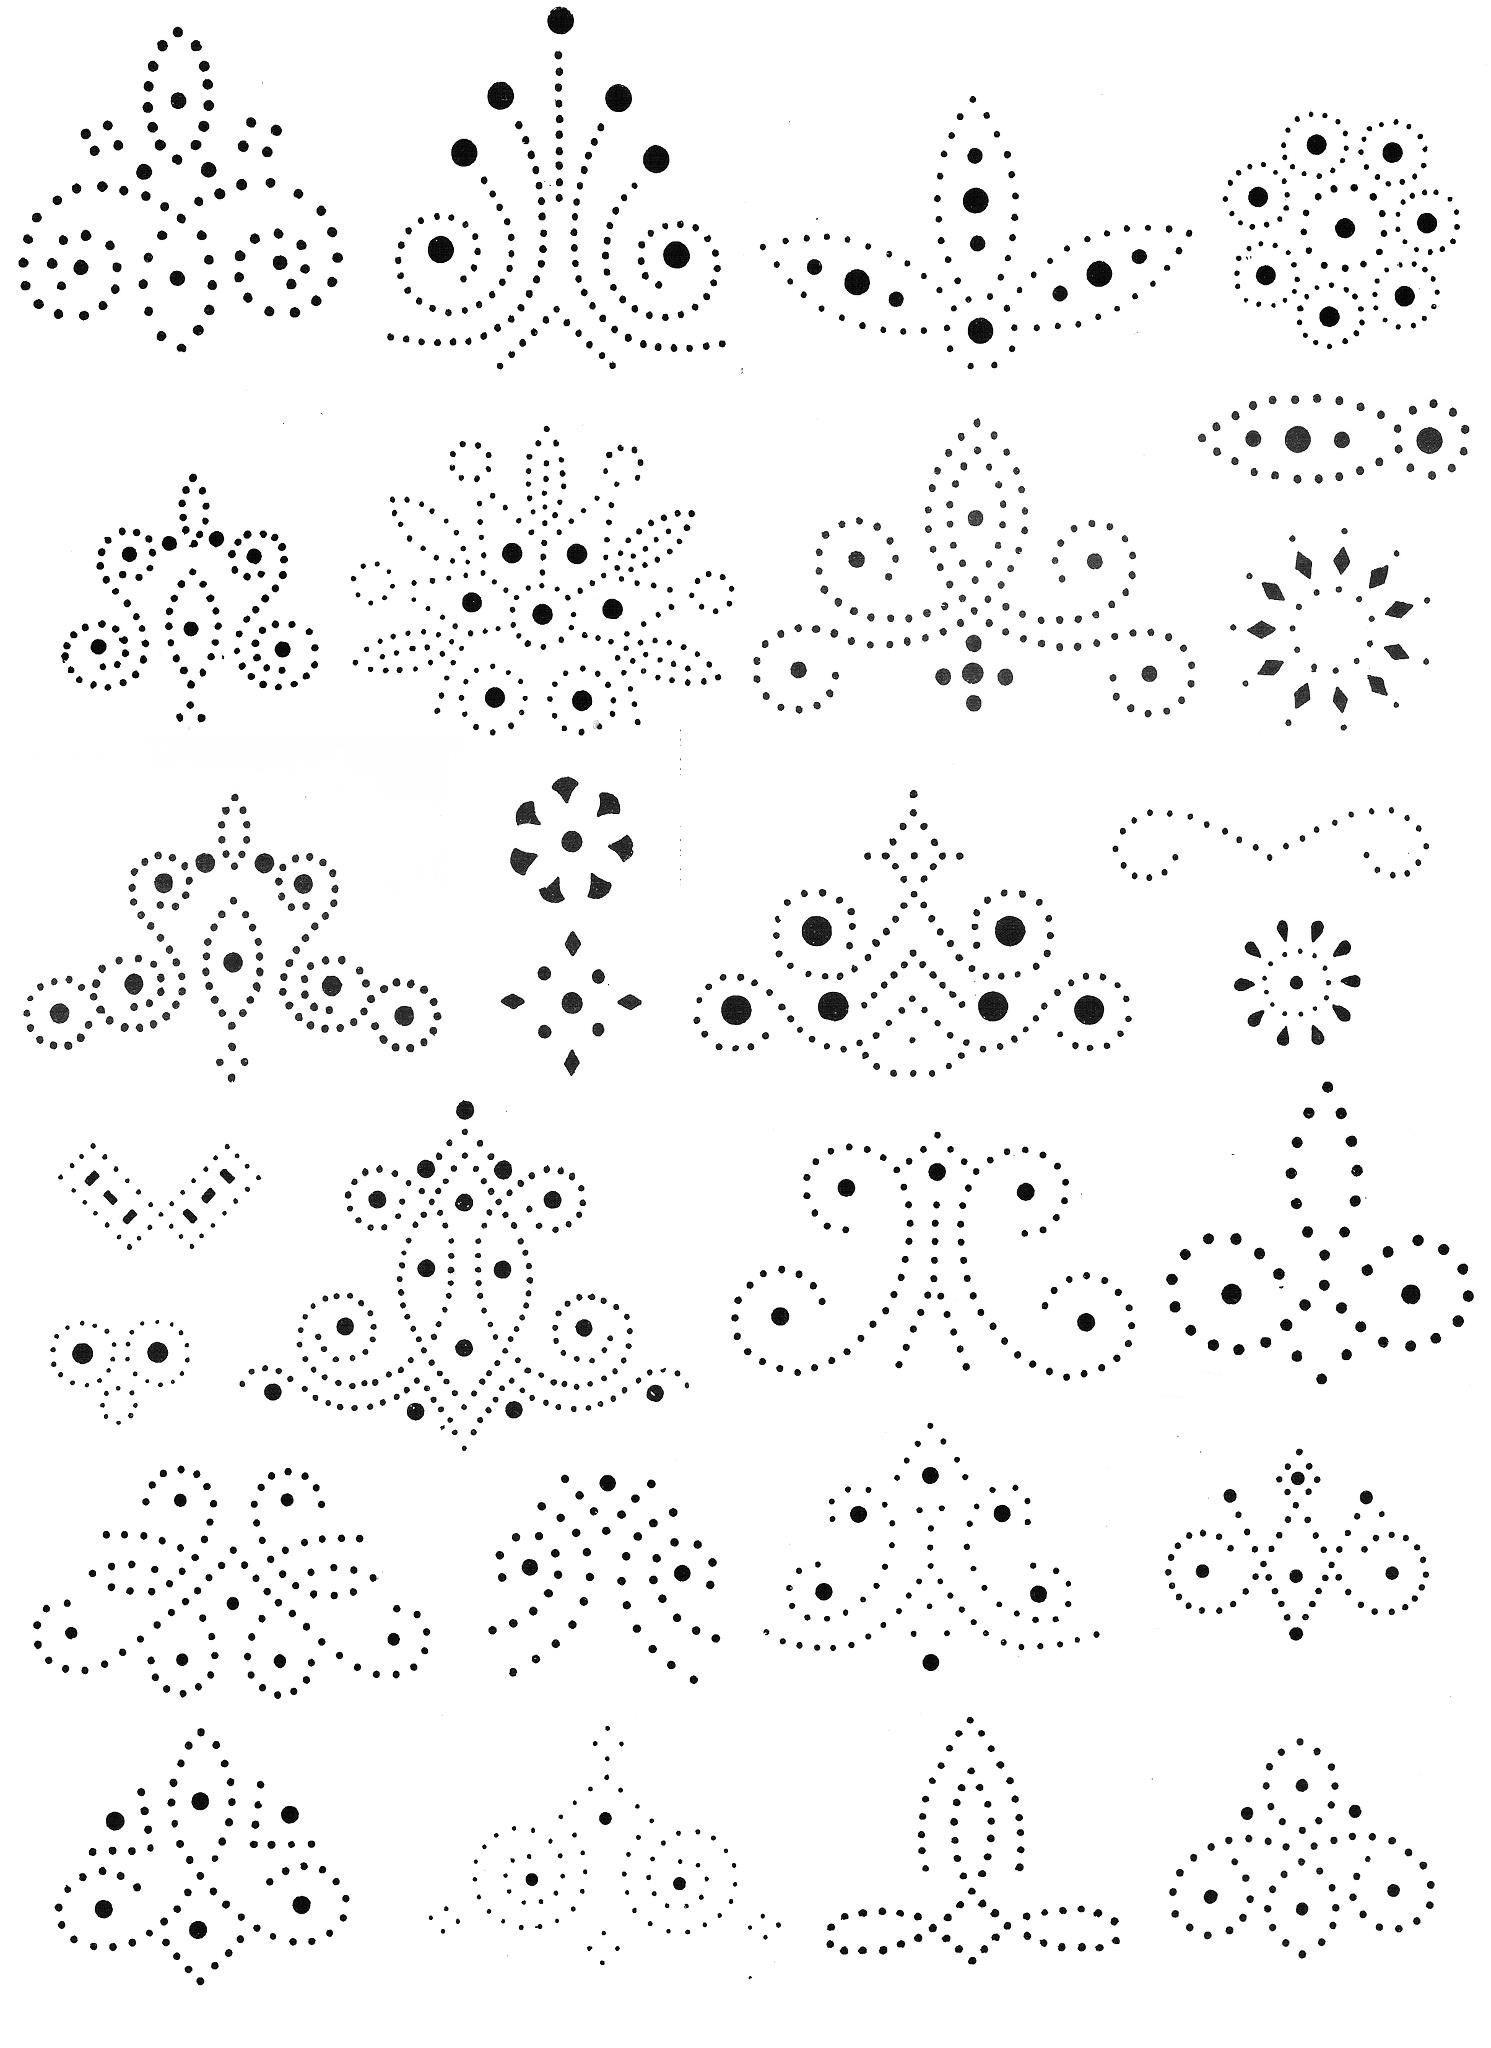 Brogue Patterns -Could Become Print? Embroidery? Could Take Images - Free Printable Paper Pricking Patterns